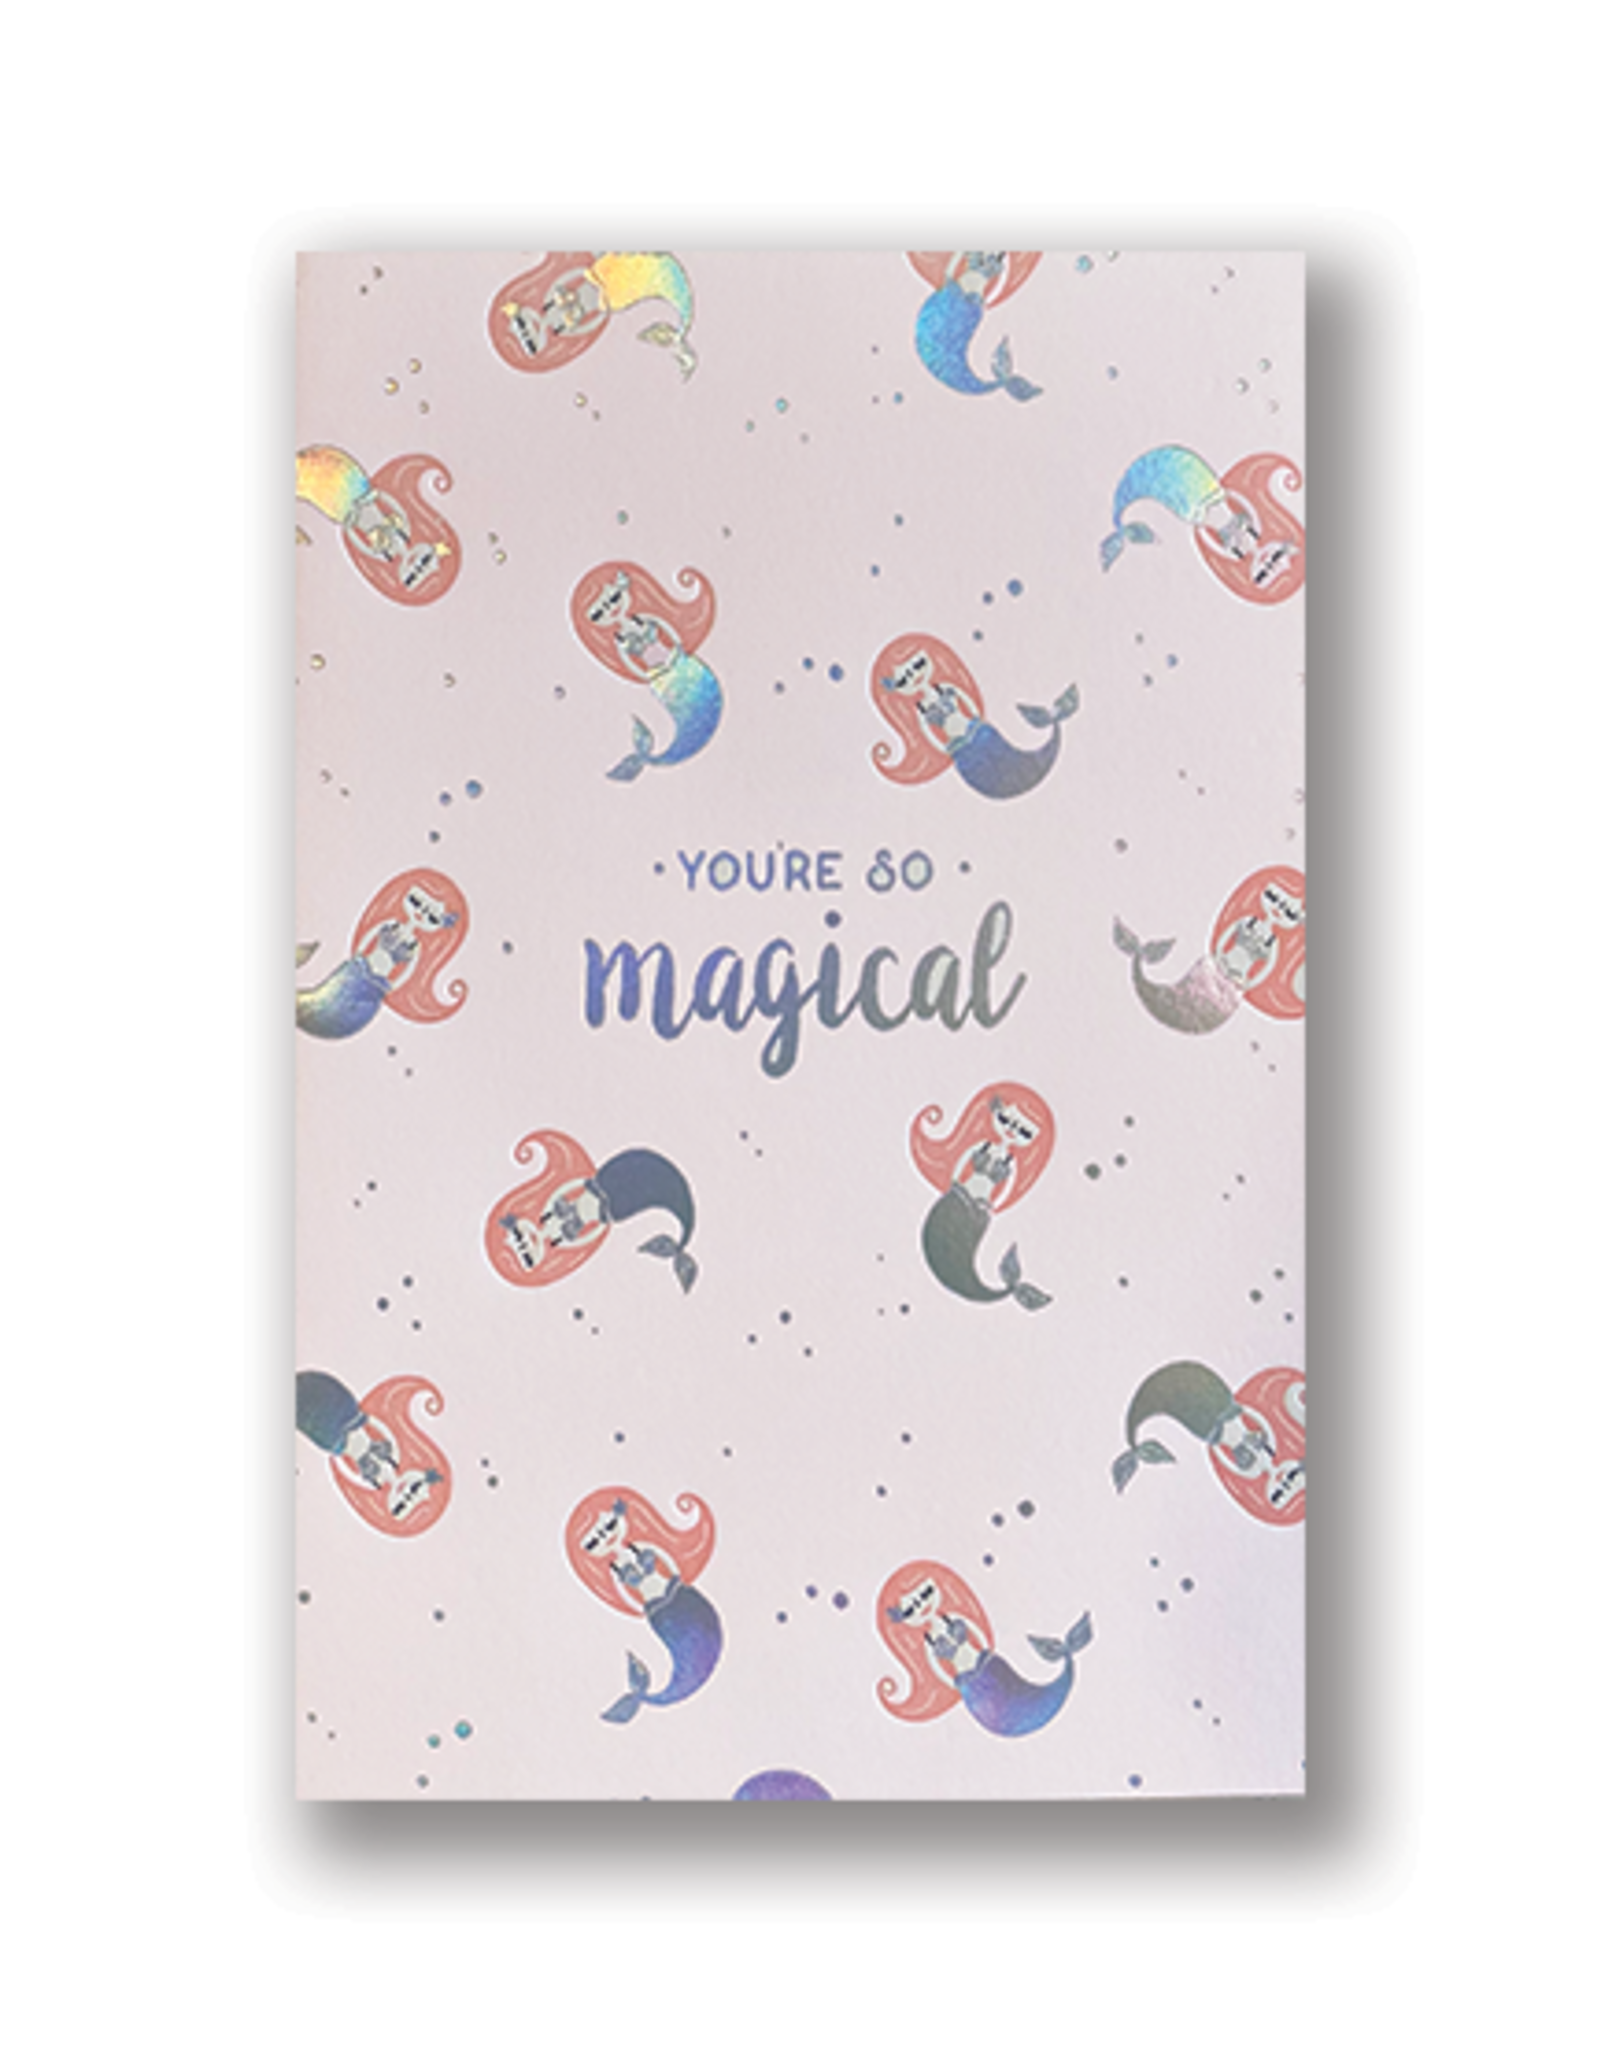 "You're So Magical" Birthday Card